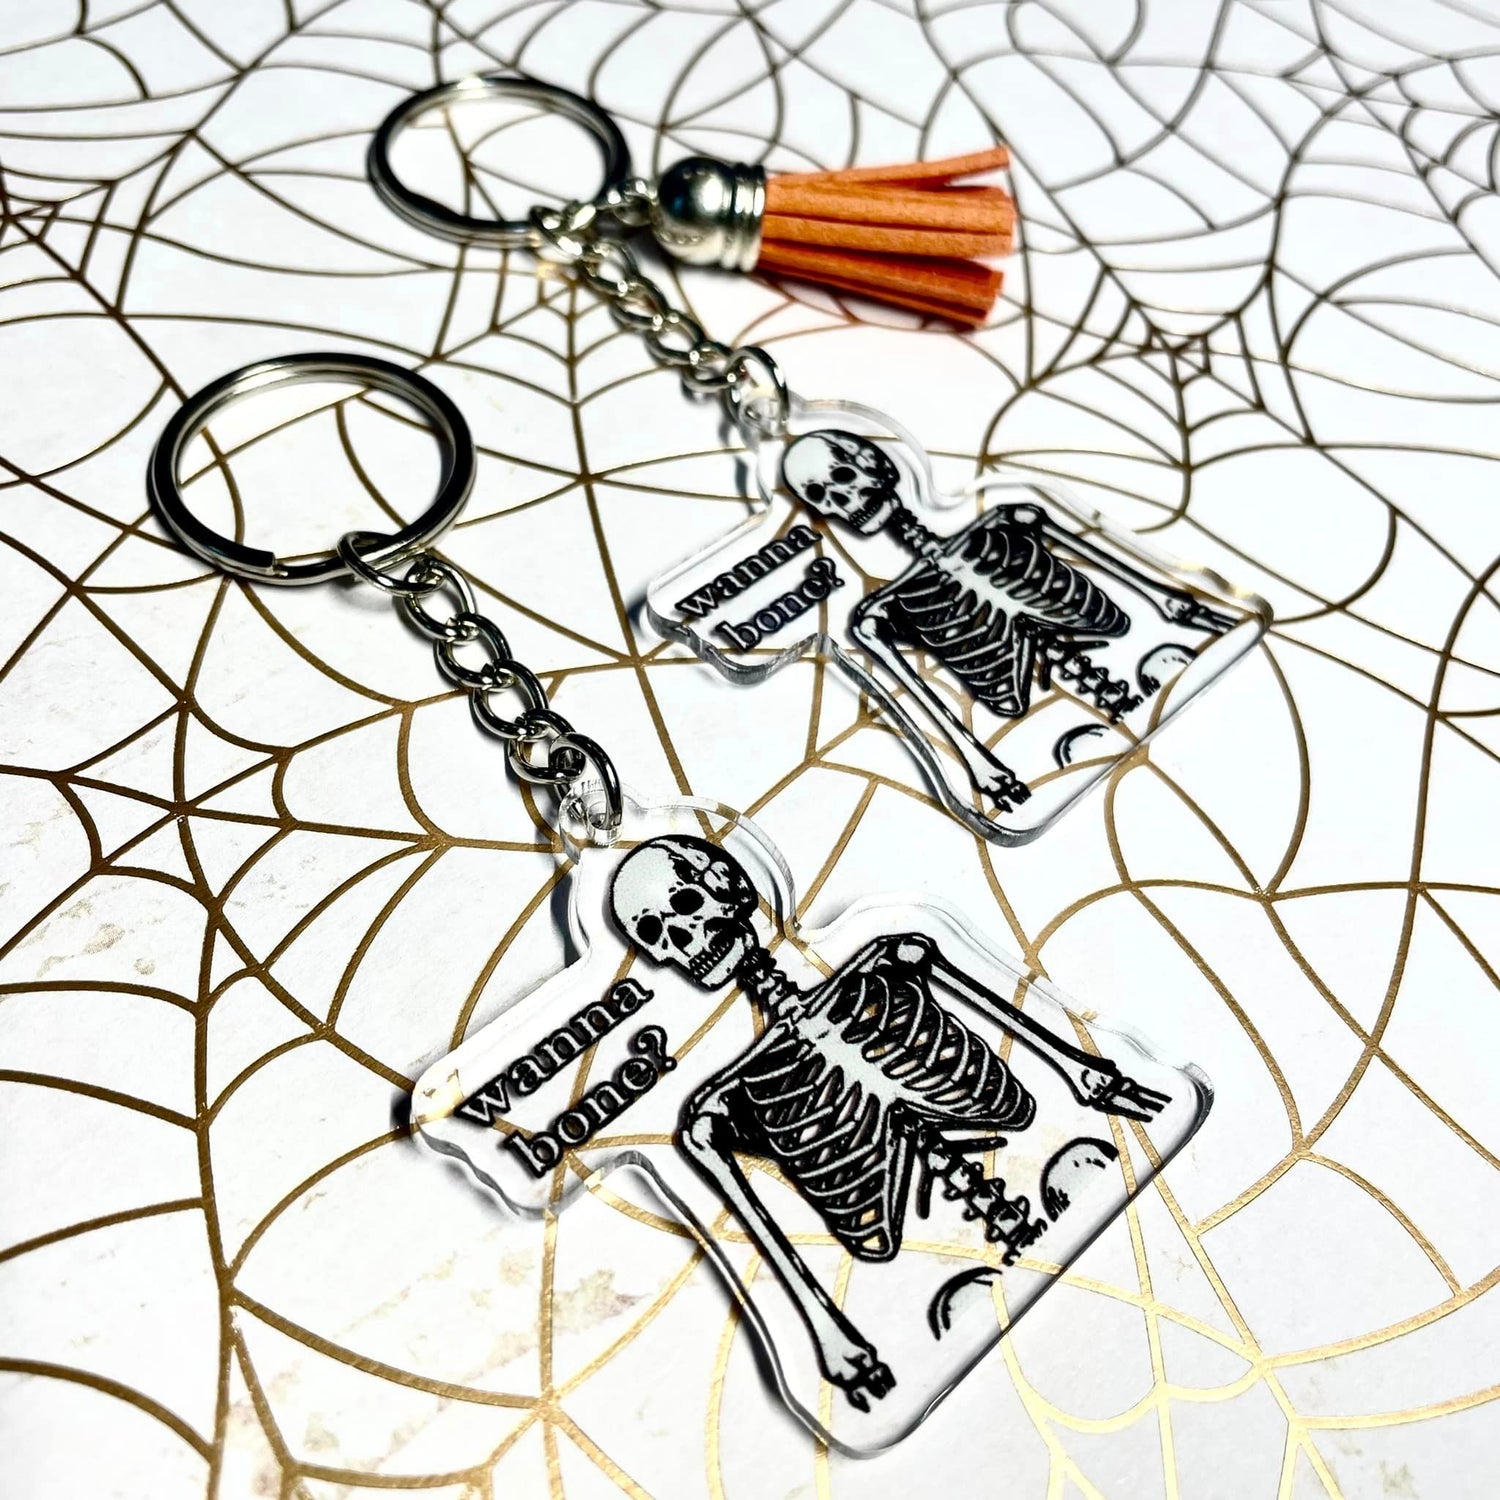 A photo of two halloween keychains. The keychain has a skeleton on it. Text on keychain reads 'Wanna Bone?'